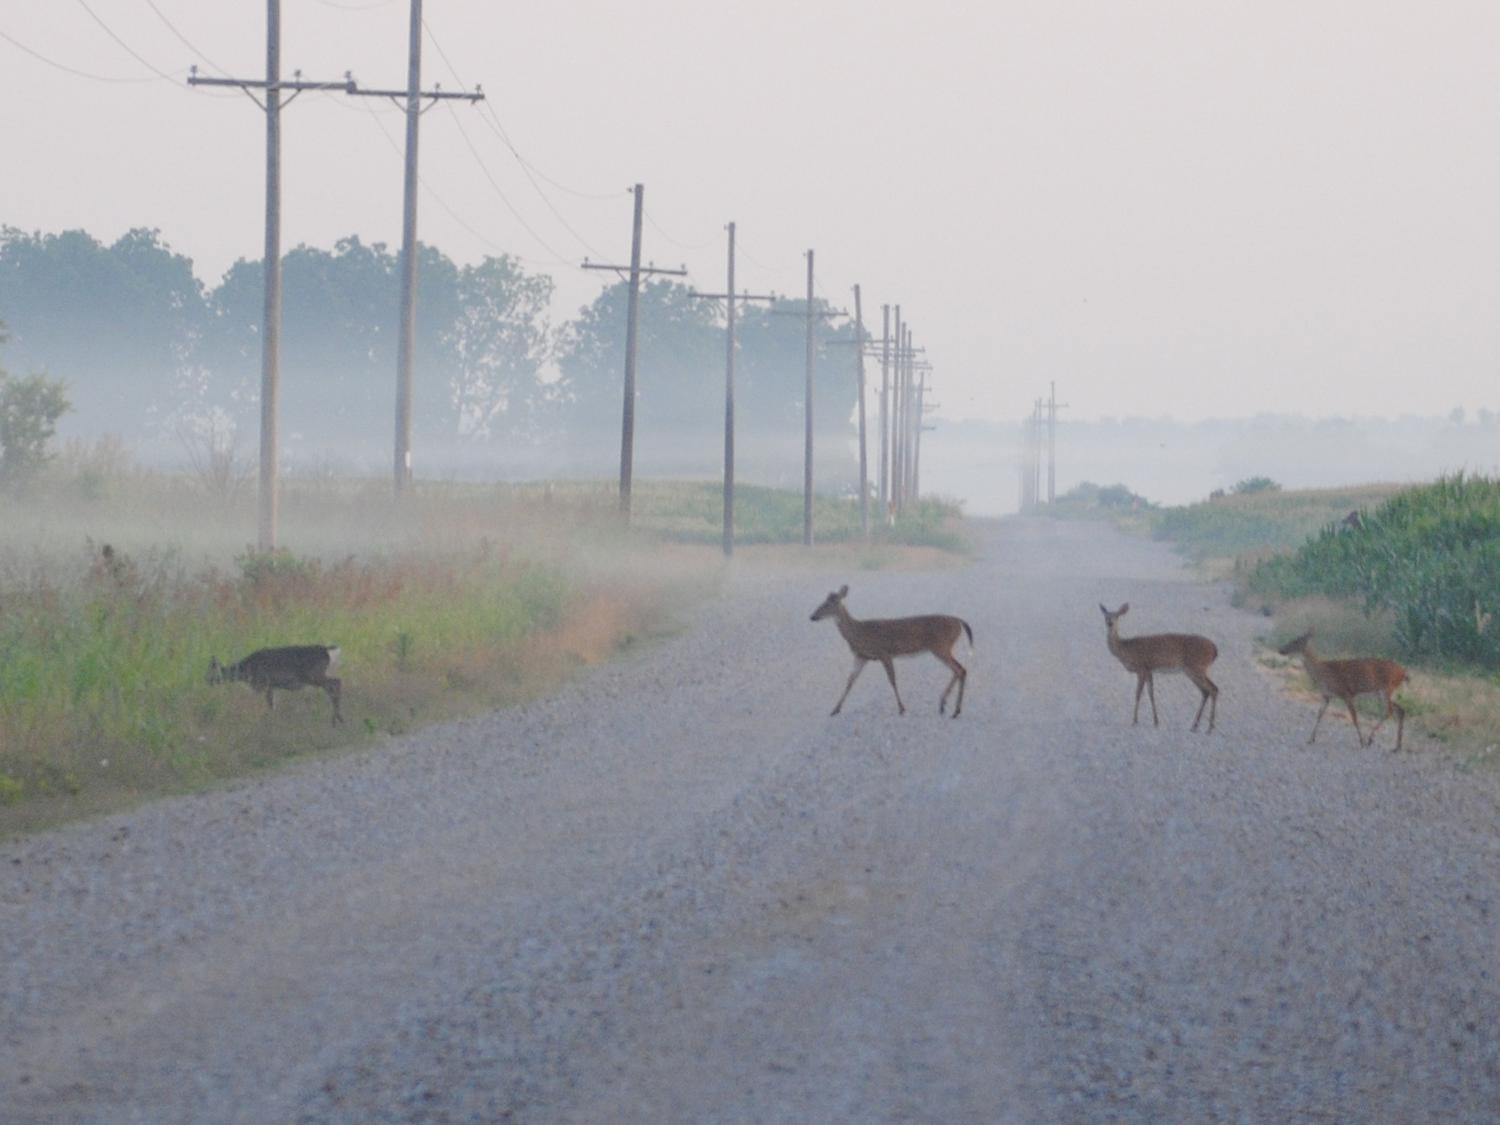 Several deer enter wooded cover area as four deer follow in single file across a gravel road with a corn field behind them on a foggy, early morning.